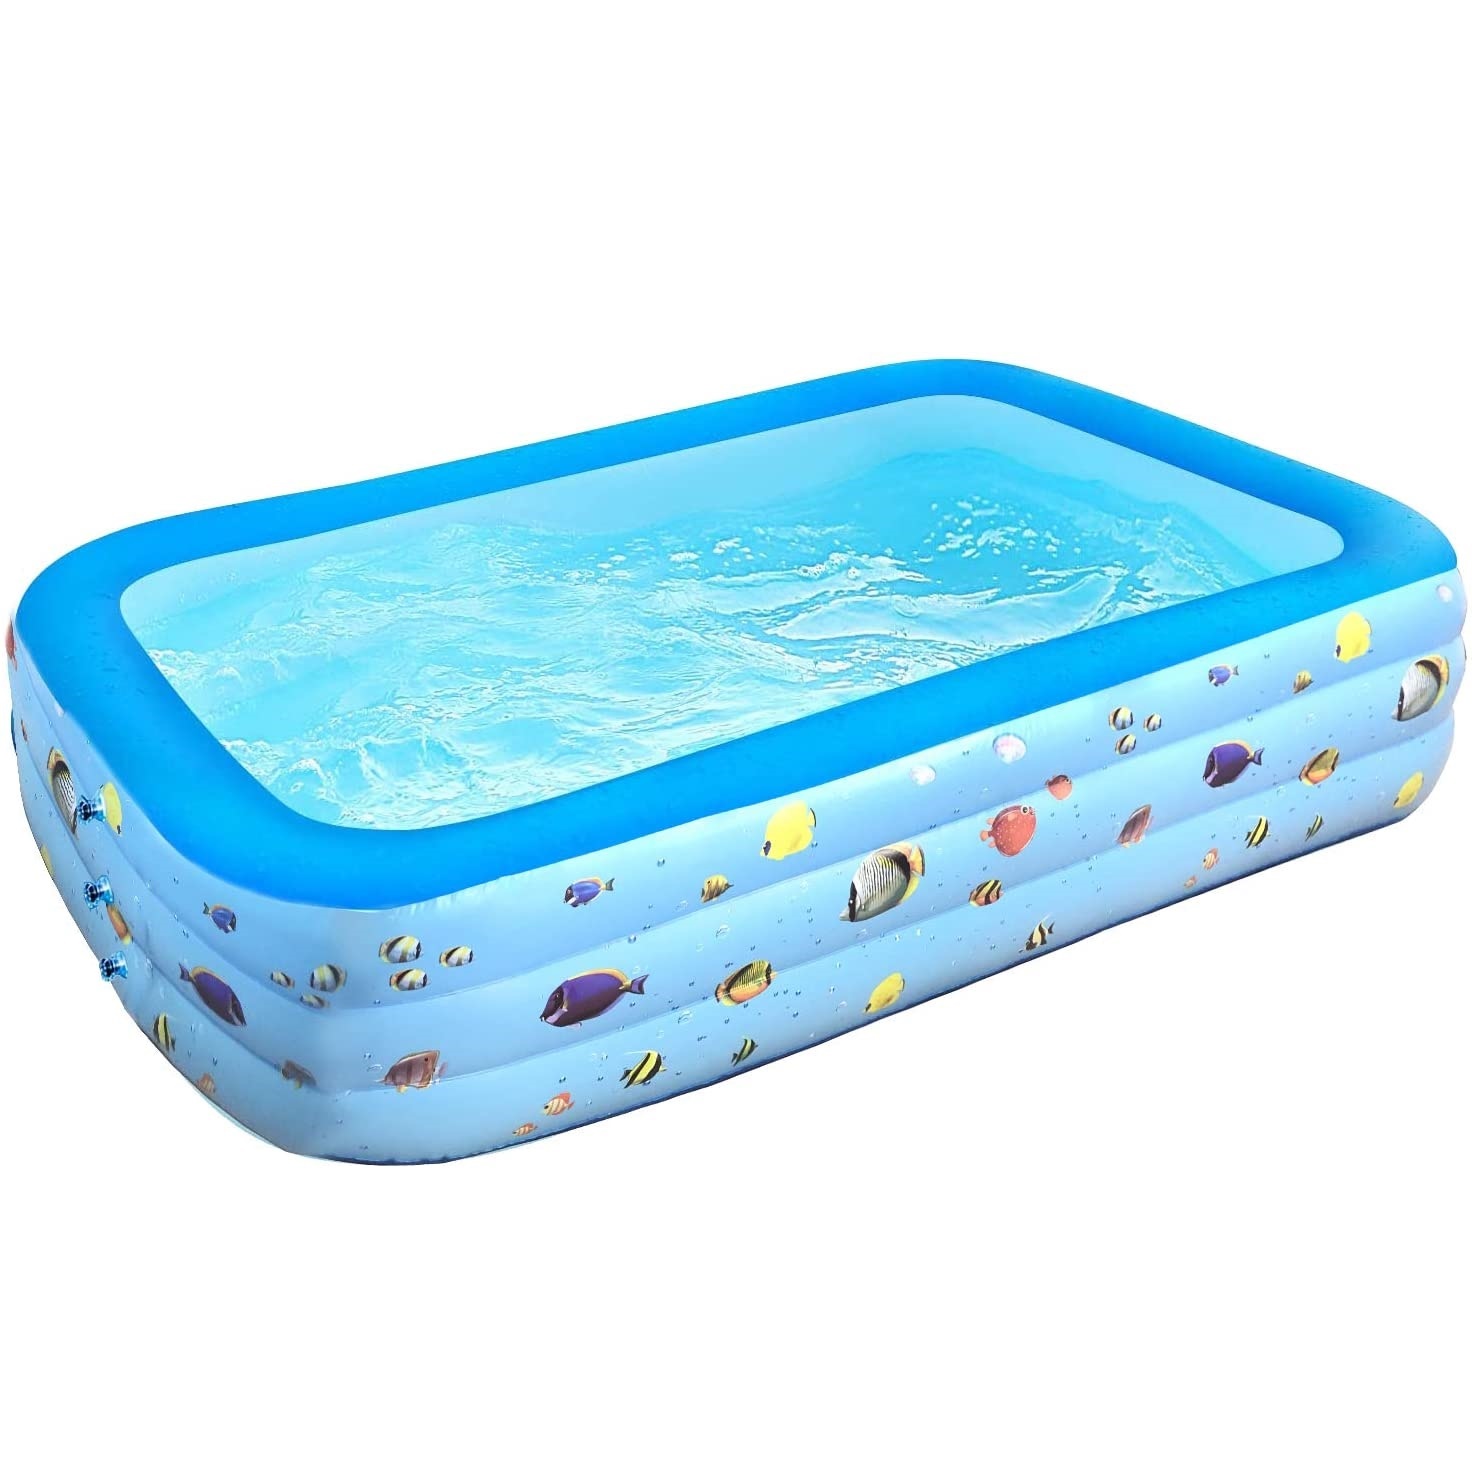 Wholesale Price Des Bandes De Boucle De Résistance -
 Inflatable Swimming Pool for Kids and Adults Family Size Blow Up Pool – Rise Group